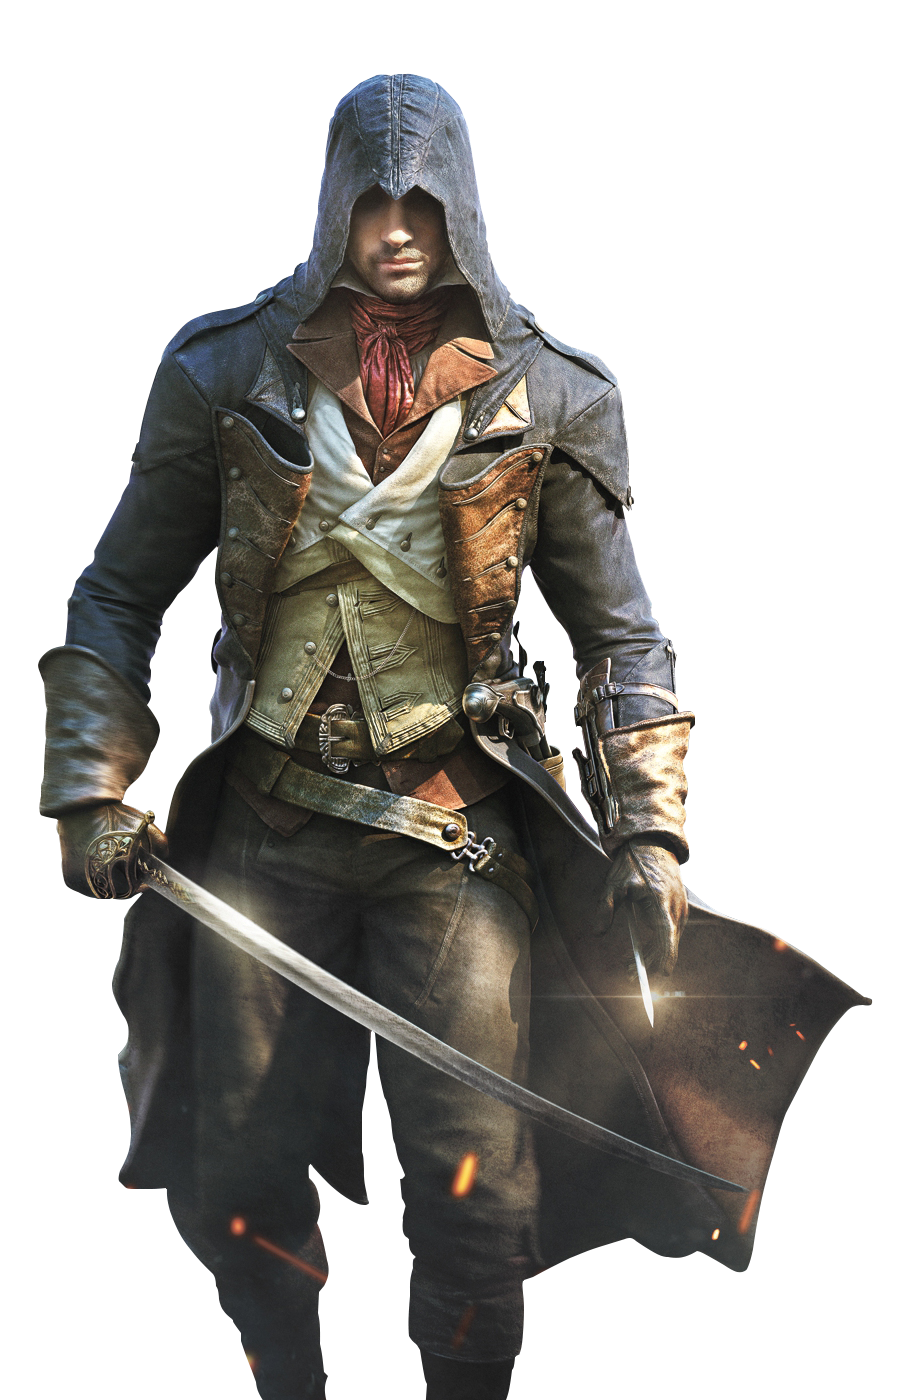 Assassins Creed Unity PNG Pic